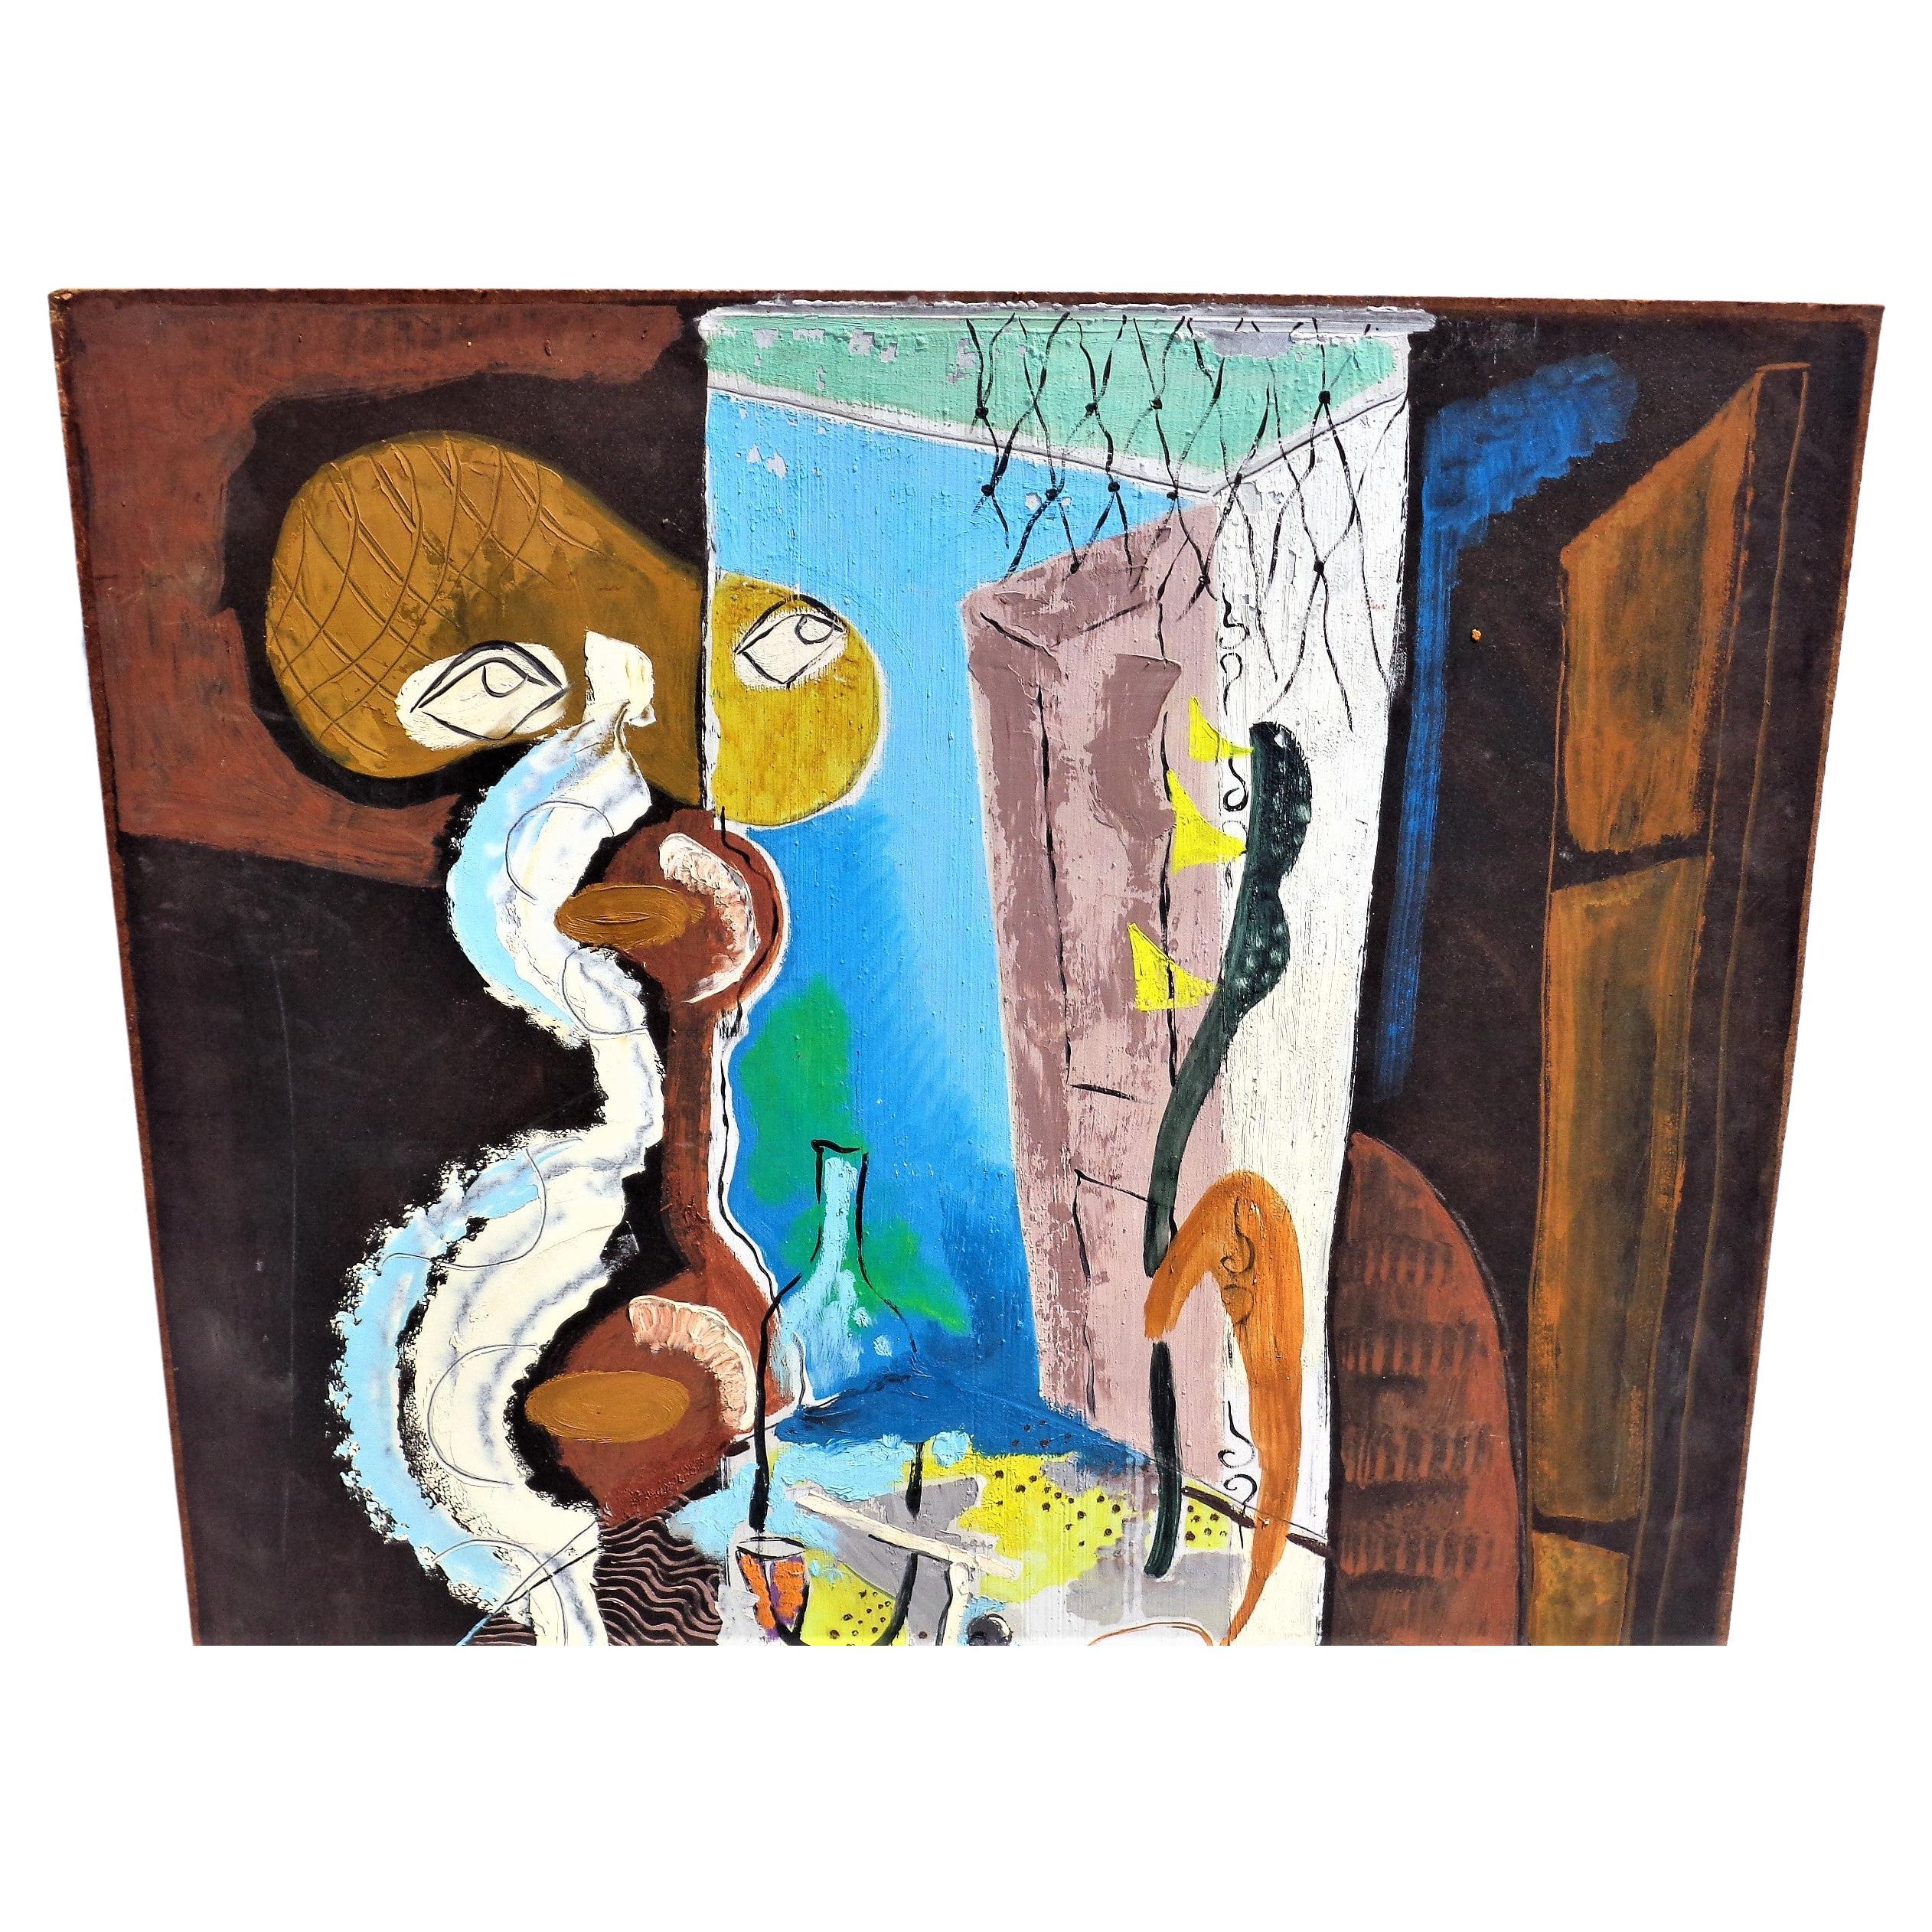 Mid-Century Modern American Modernist Abstract Oil Painting Interior Scene w/ Figure, Zoute' 1947